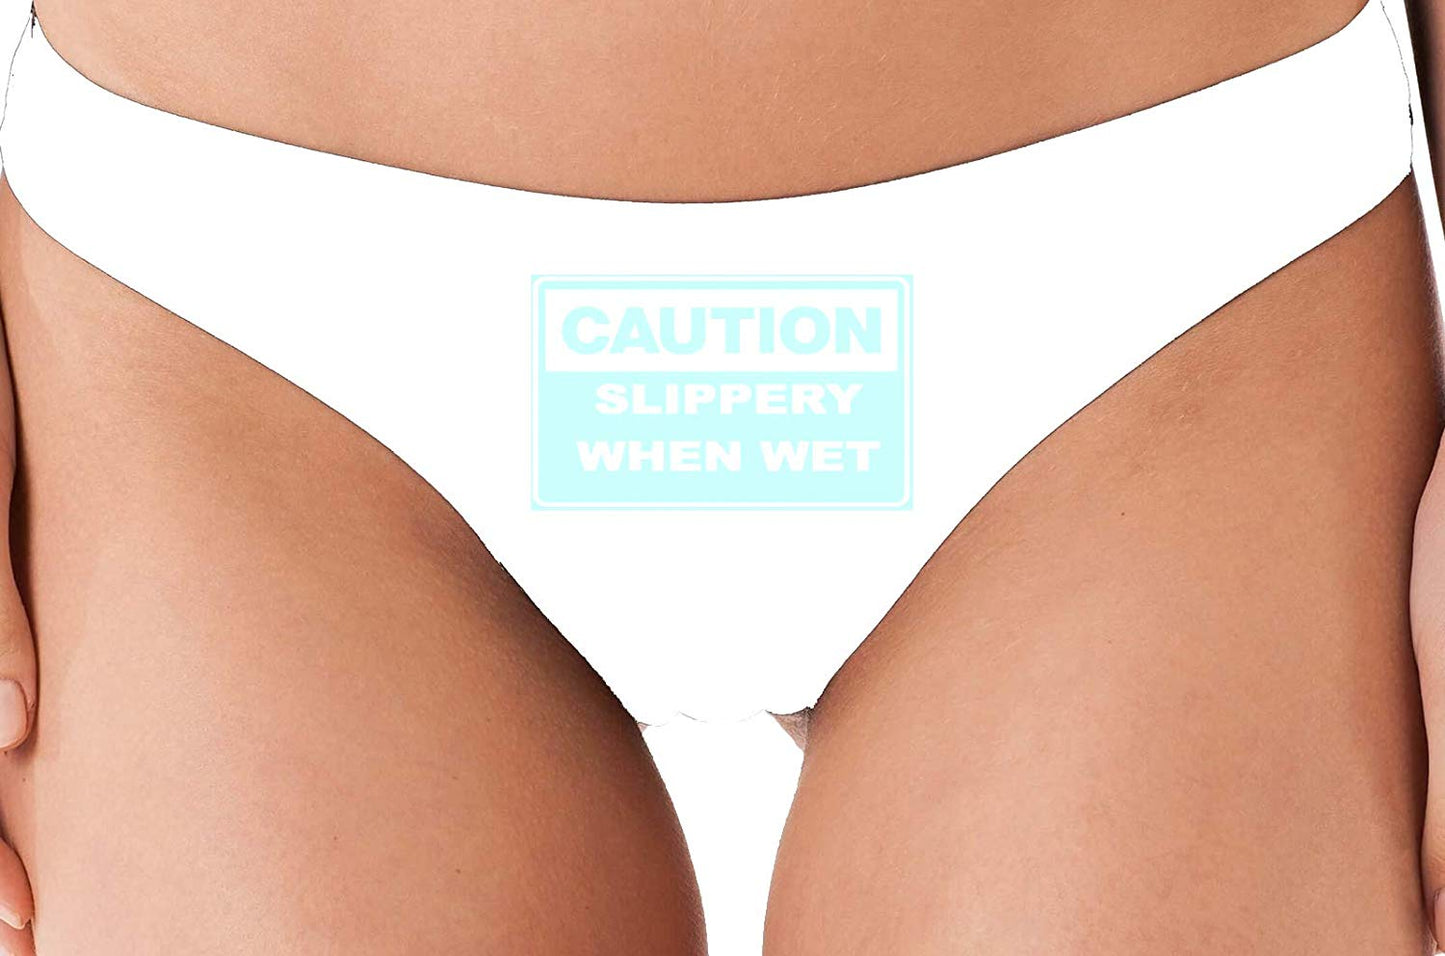 Knaughty Knickers Caution Slippery When Wet Funny Flirty White Thong Underwear